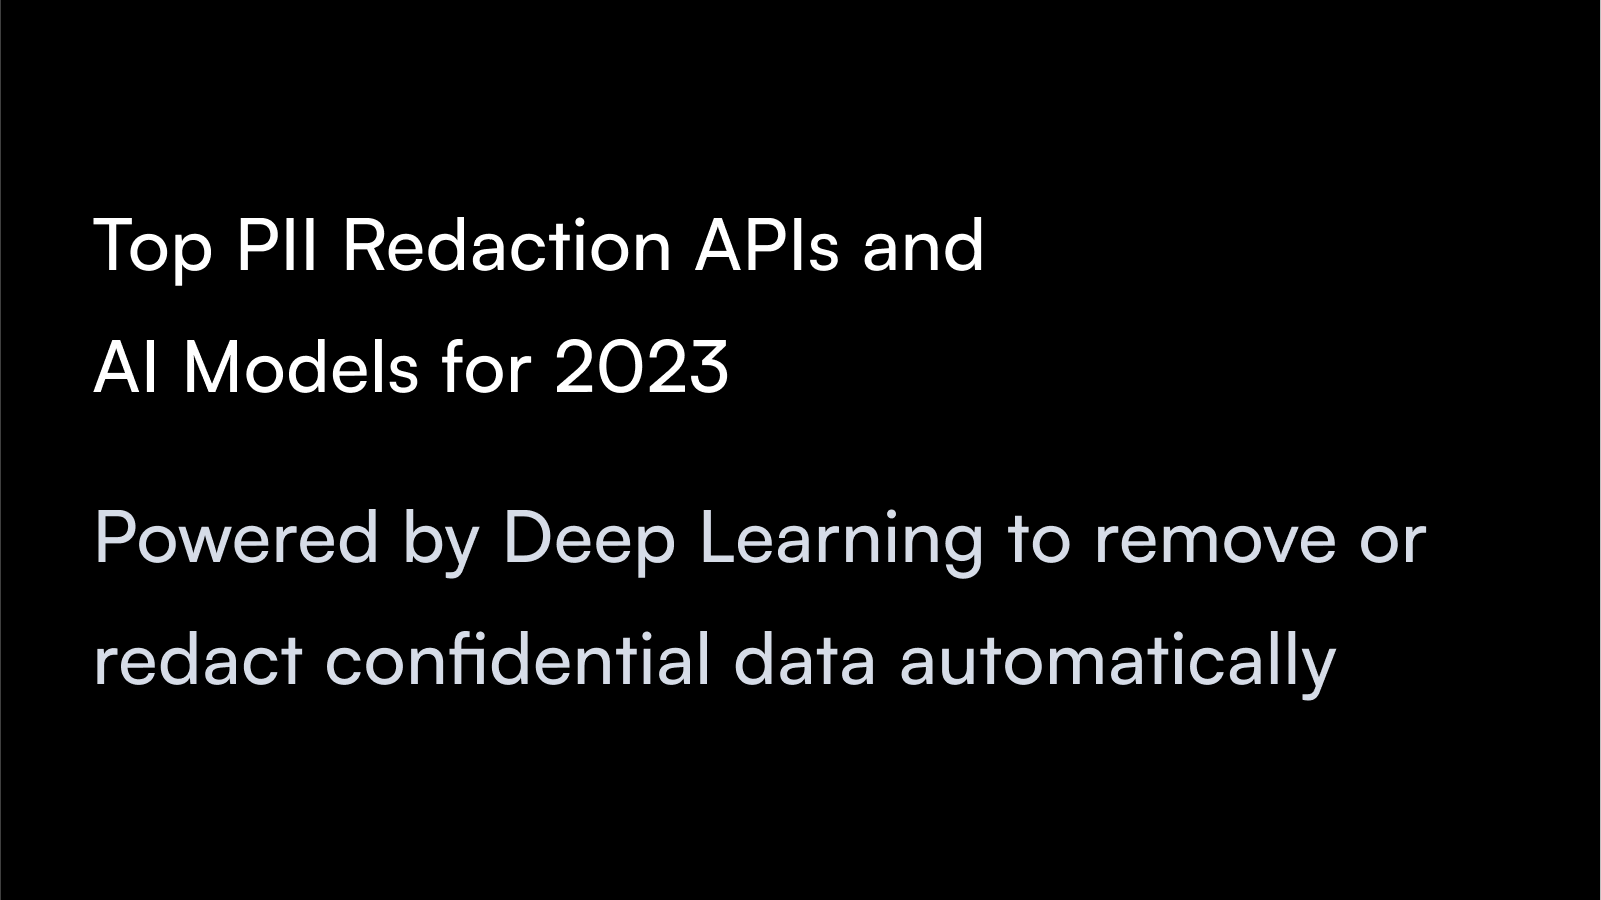 What are the Top PII Redaction APIs and AI Models for 2023?